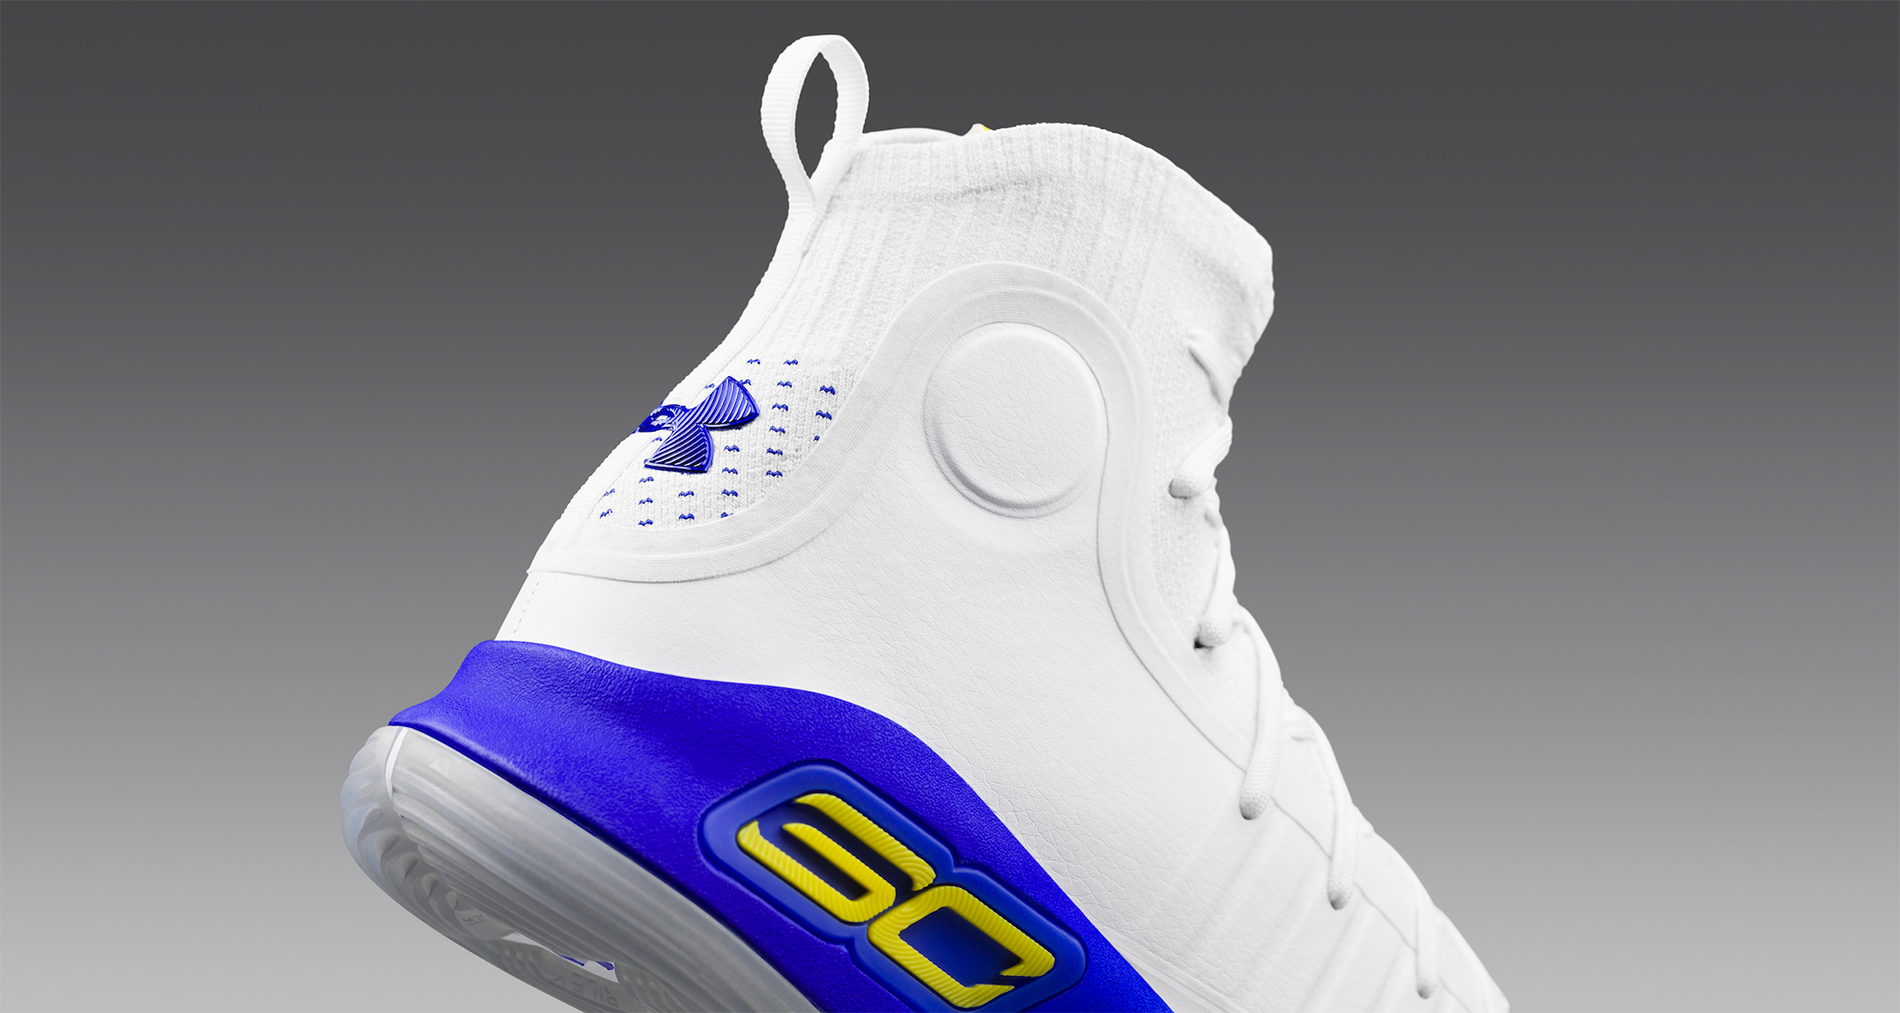 Under Armour Curry 4 "More Dubs"